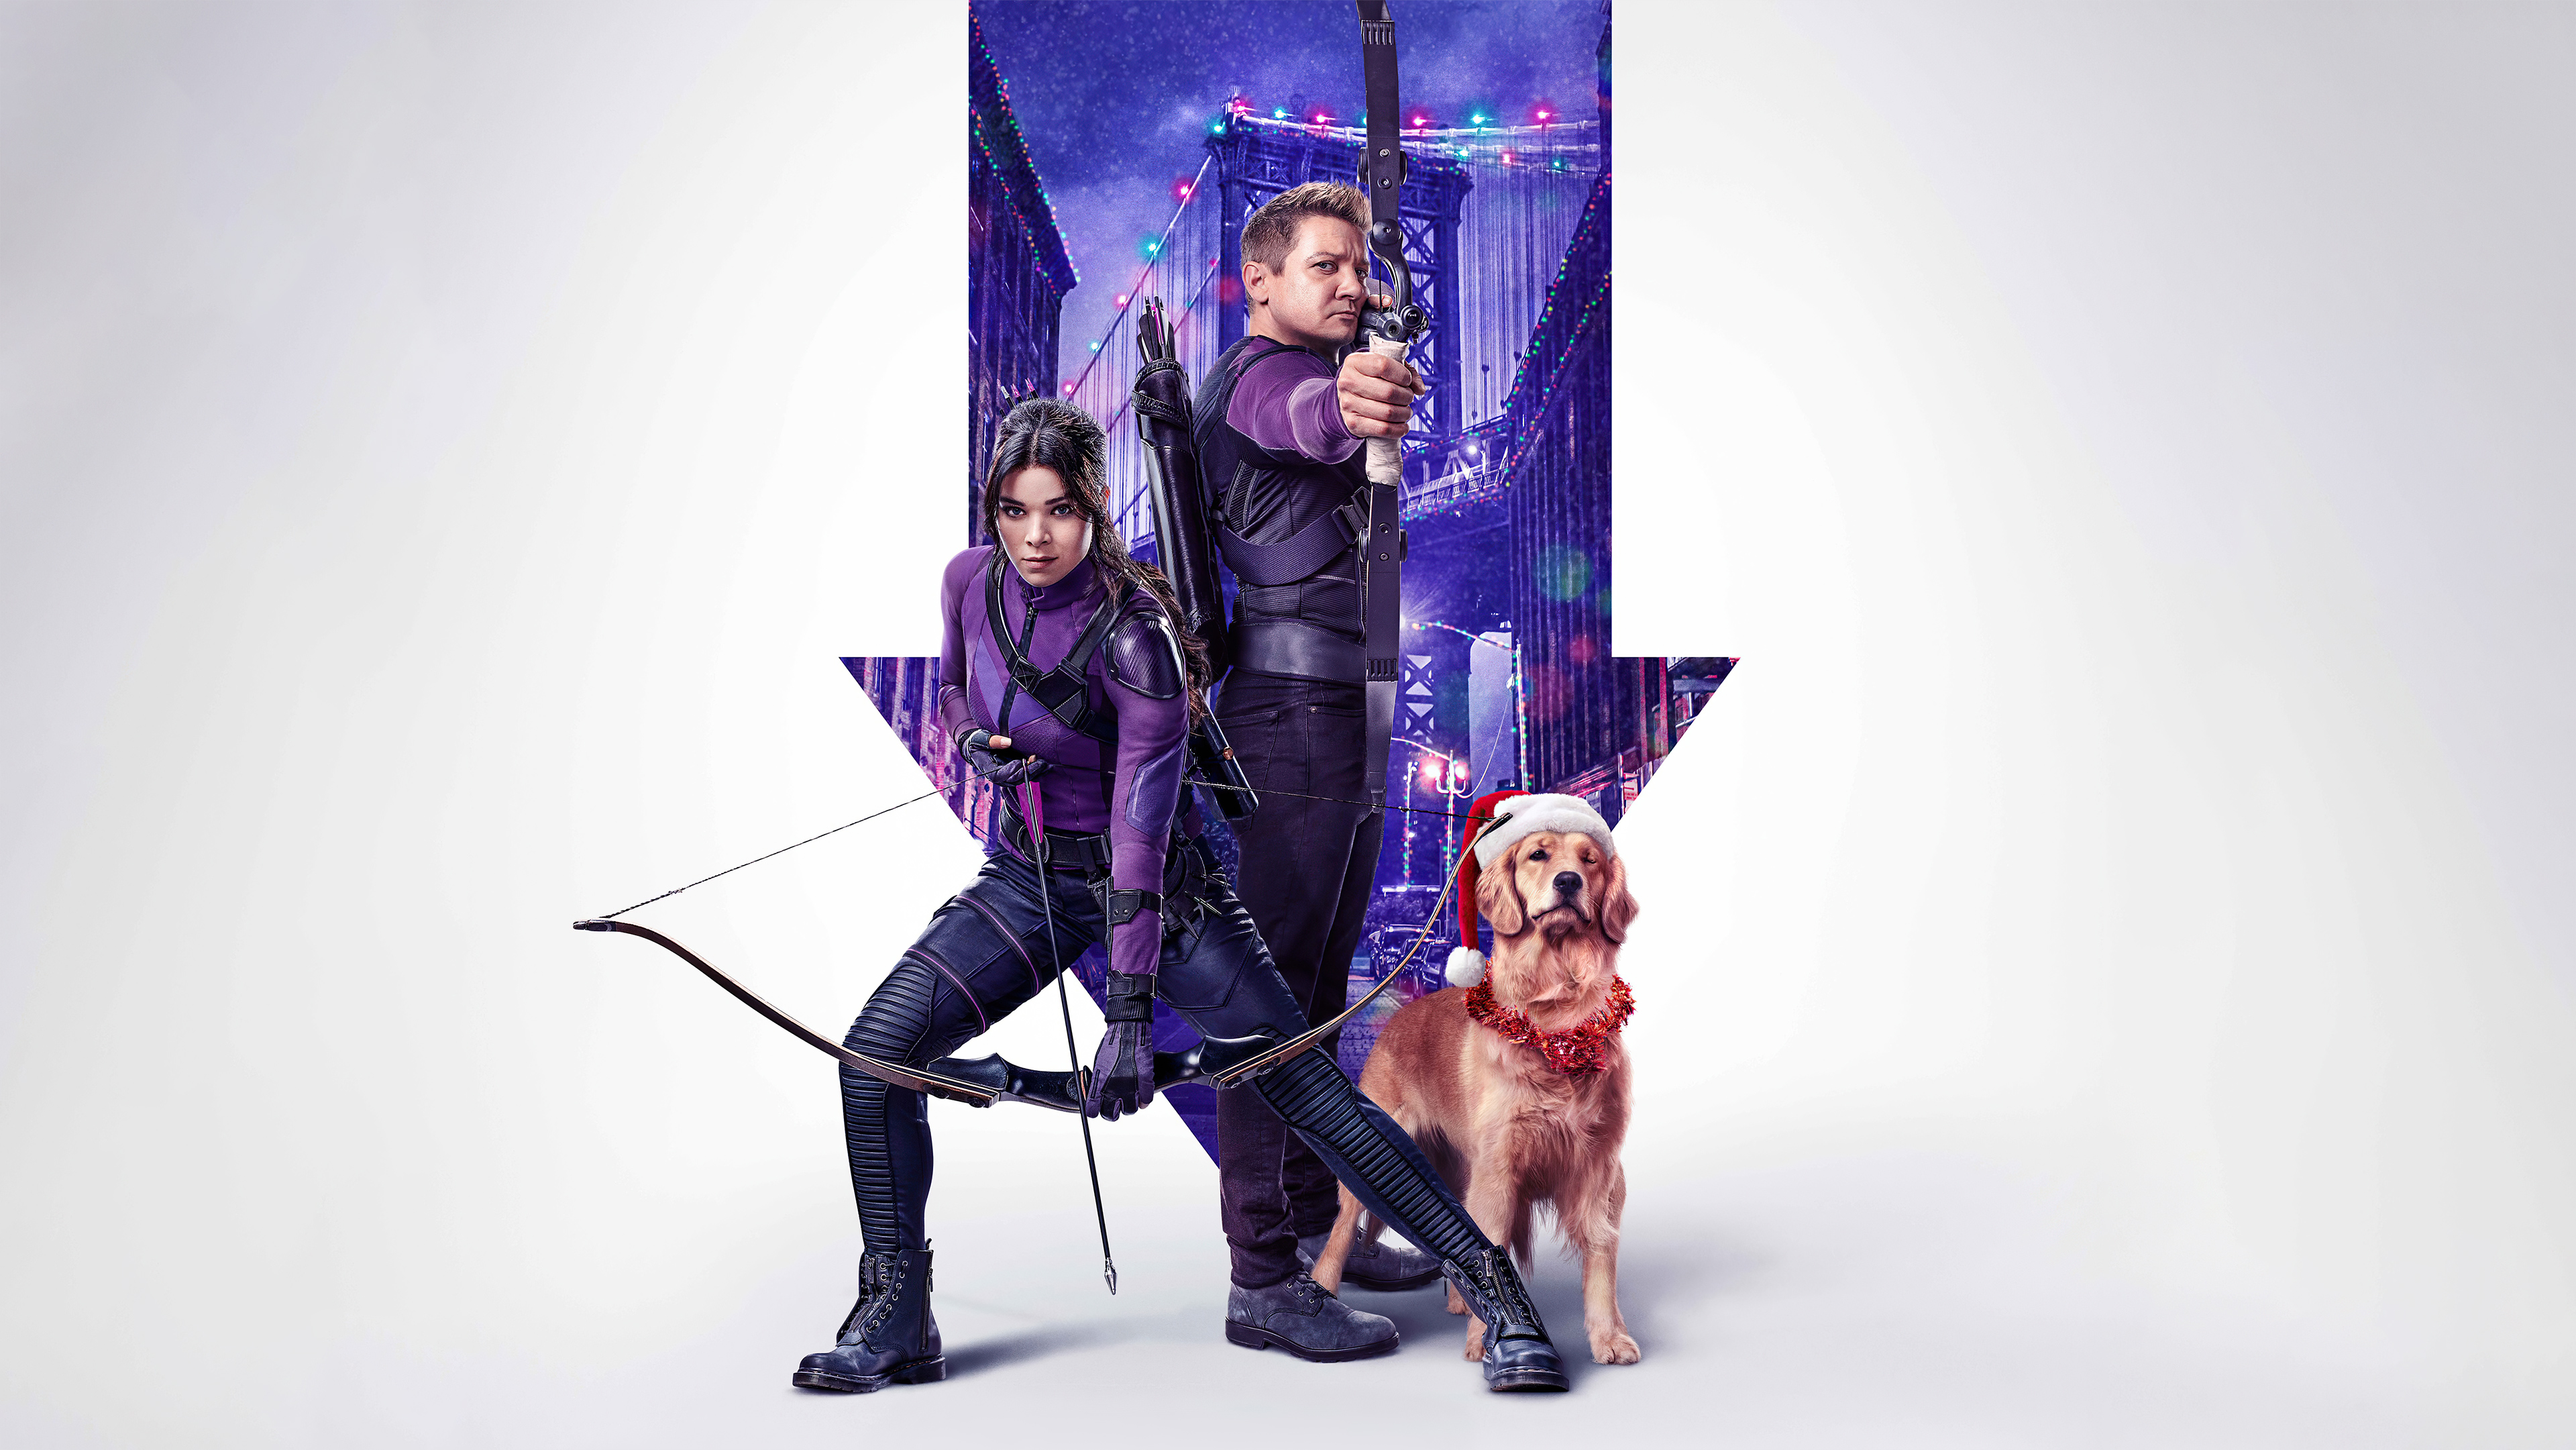 kate bishop, clint barton, tv show, hawkeye, hailee steinfeld, jeremy renner, lucky the pizza dog